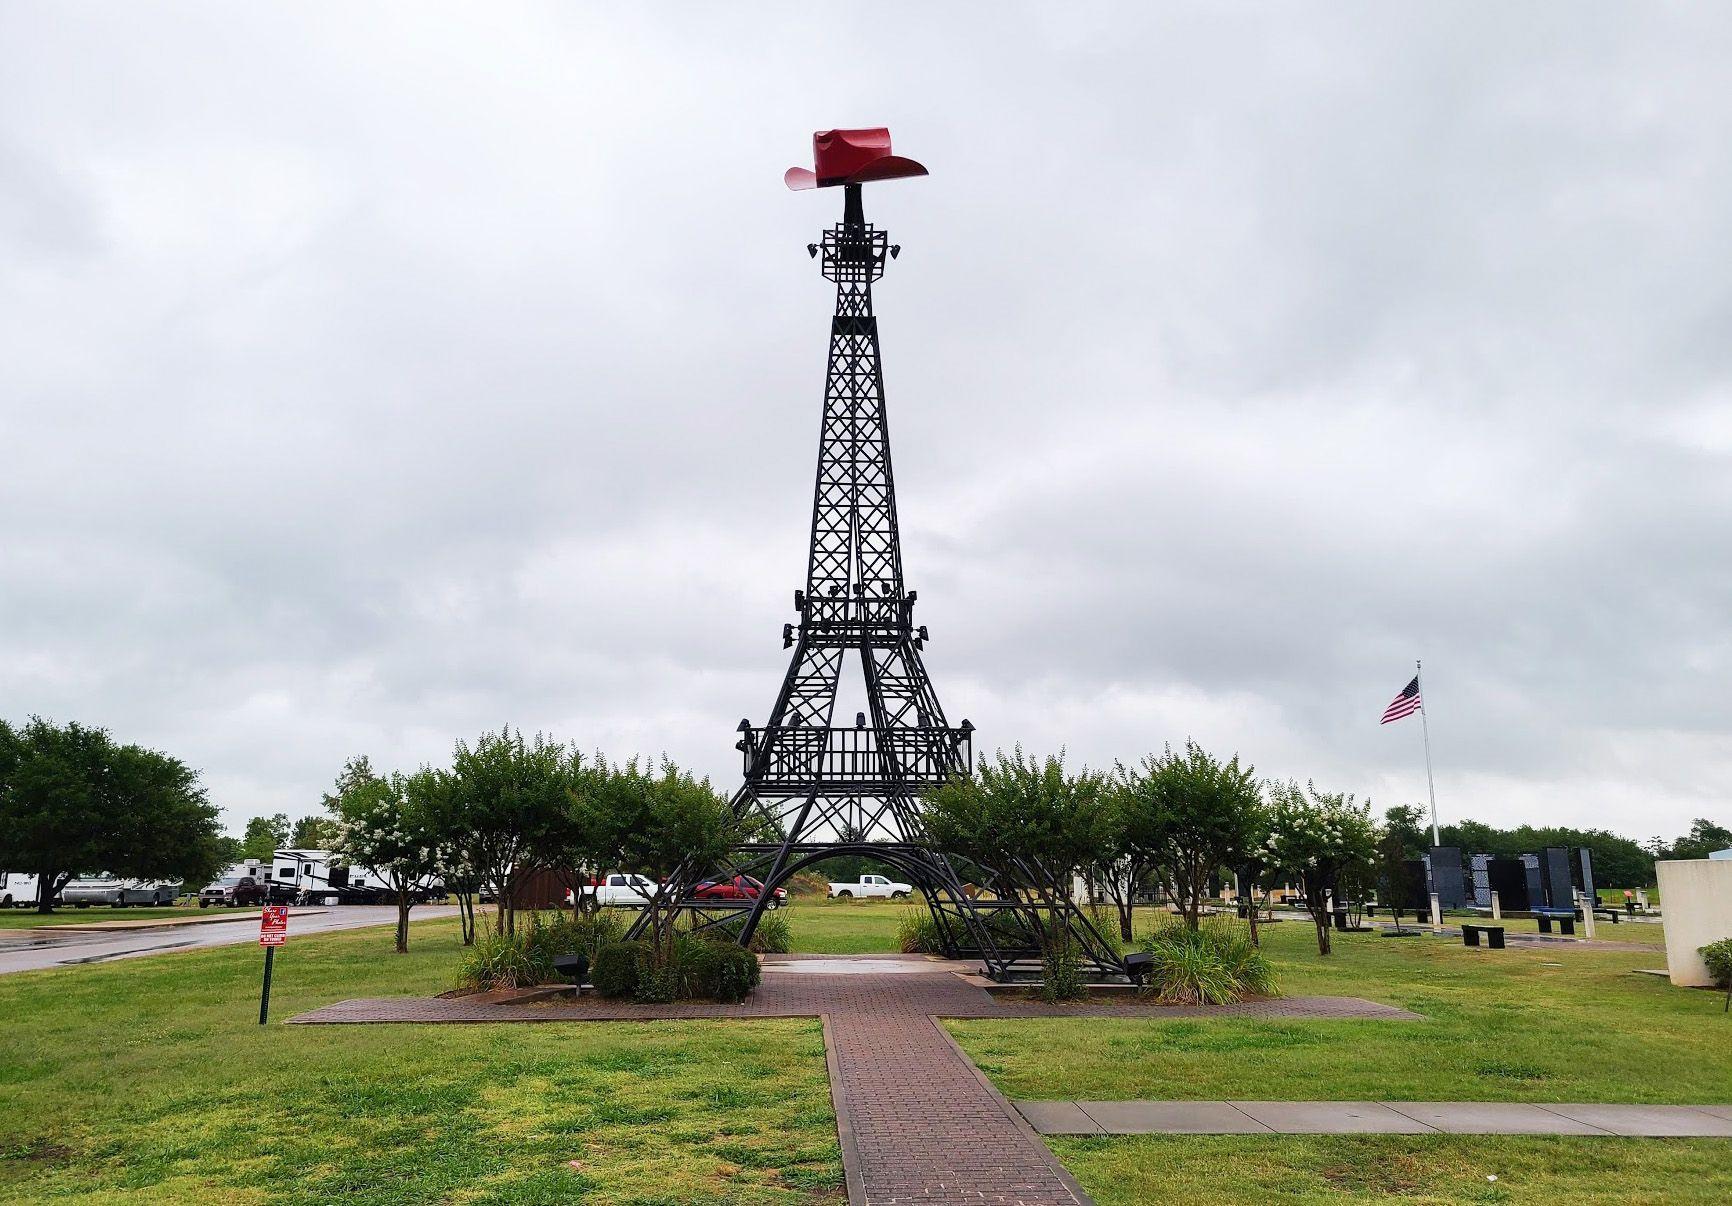 A small eiffel tower replica with a red cowboy hat on top.